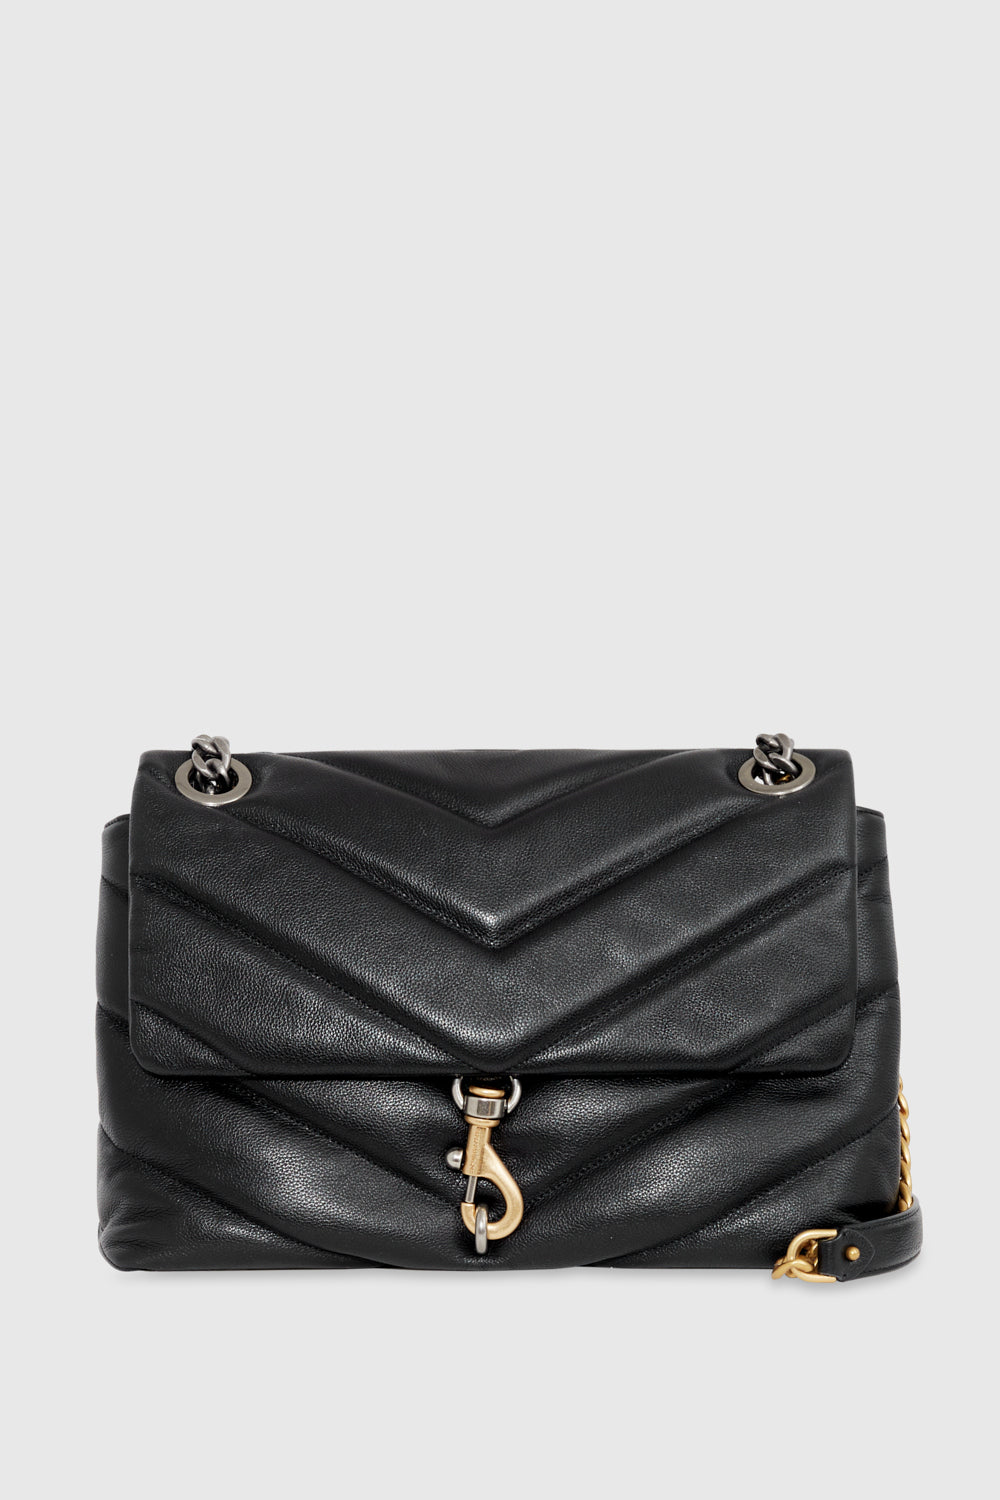 REBECCA MINKOFF Edie Chevron Quilted Leather Maxi Chain Crossbody Bag